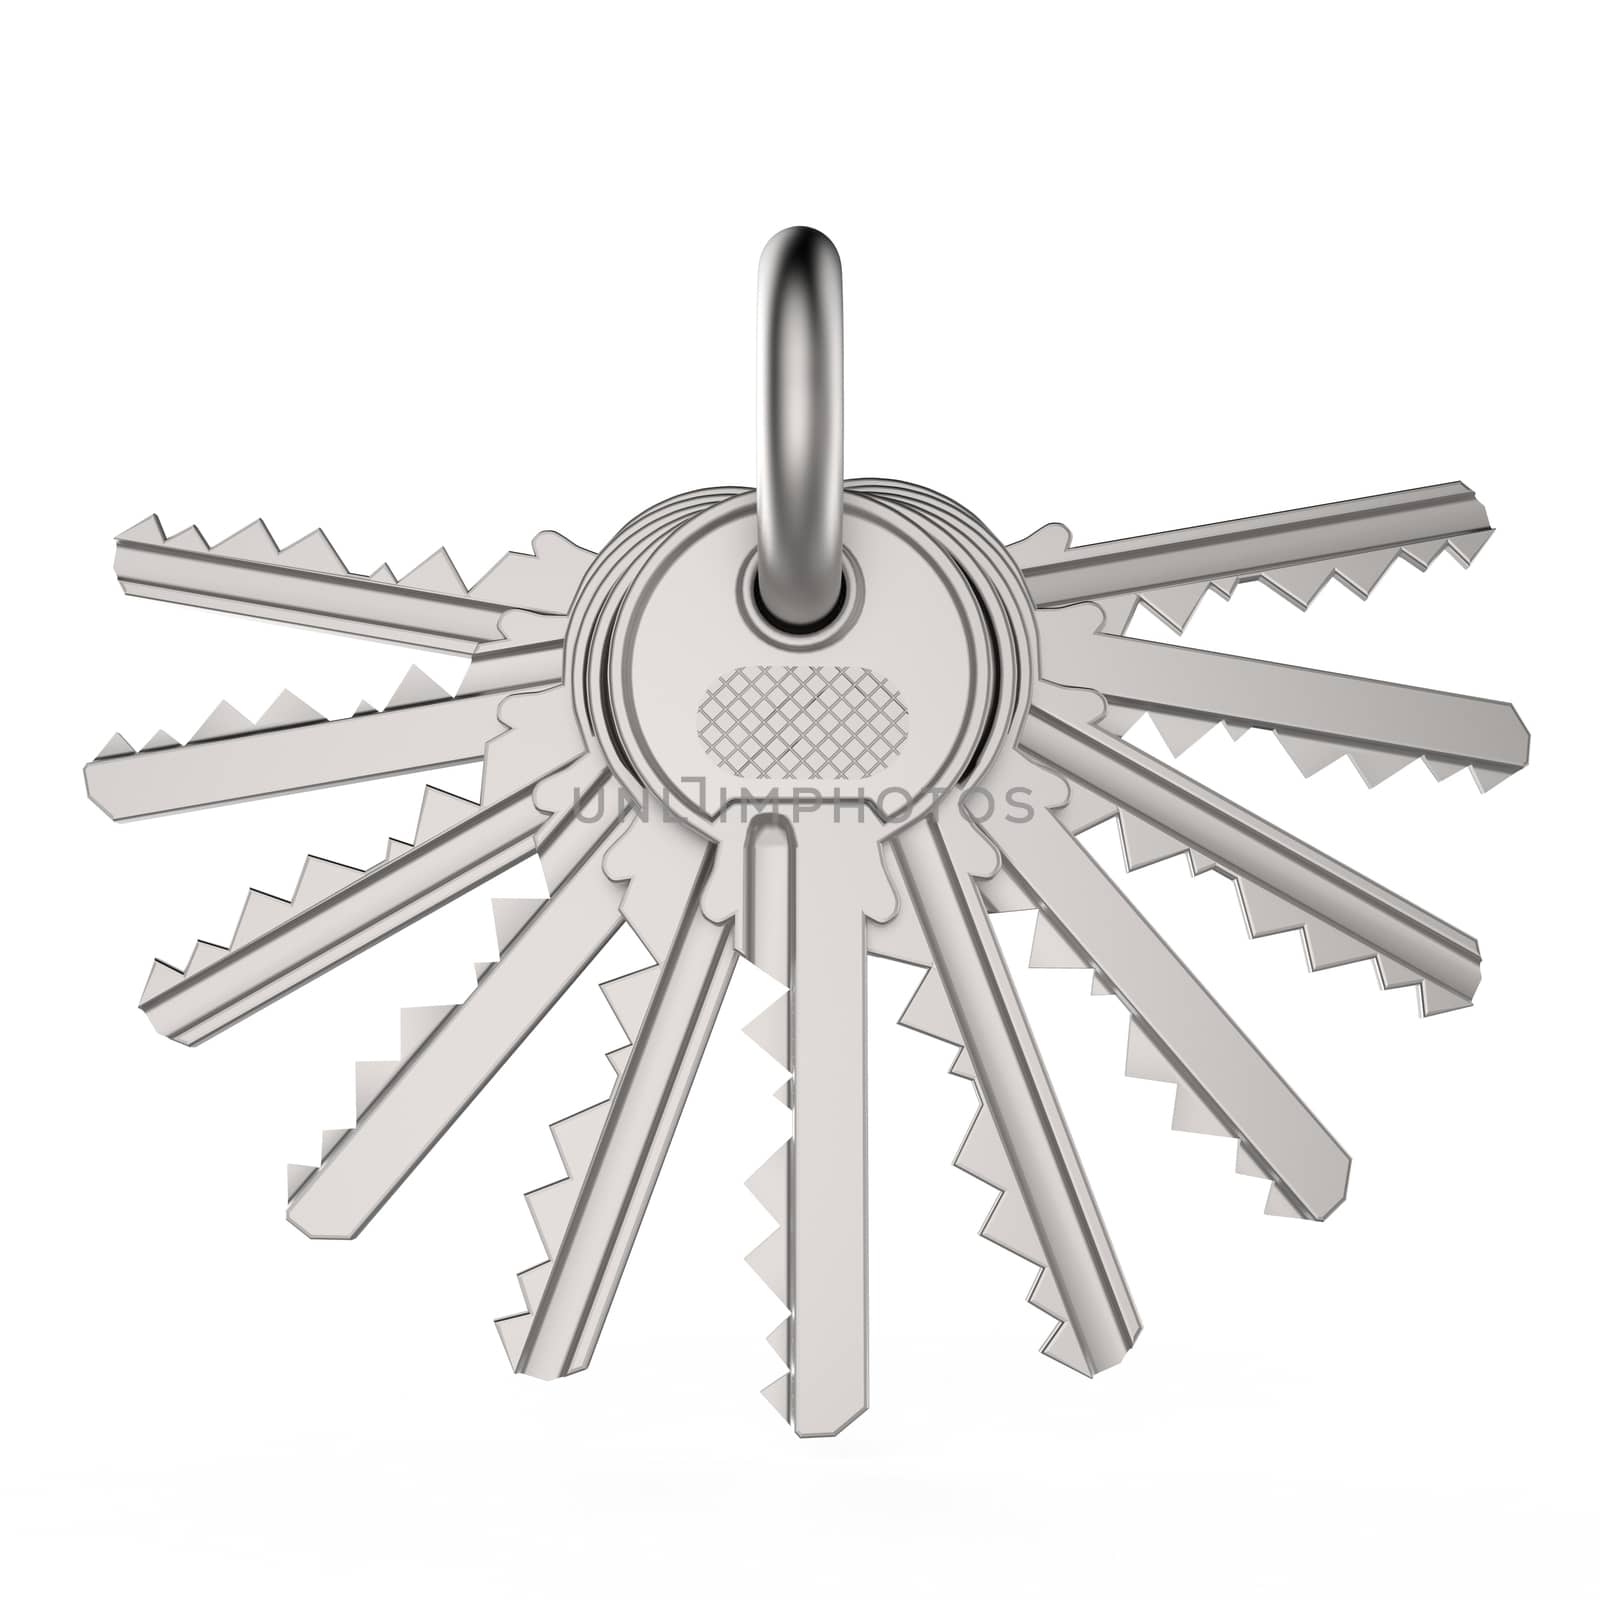 Pile of keys, front view 3D render illustration isolated on white background